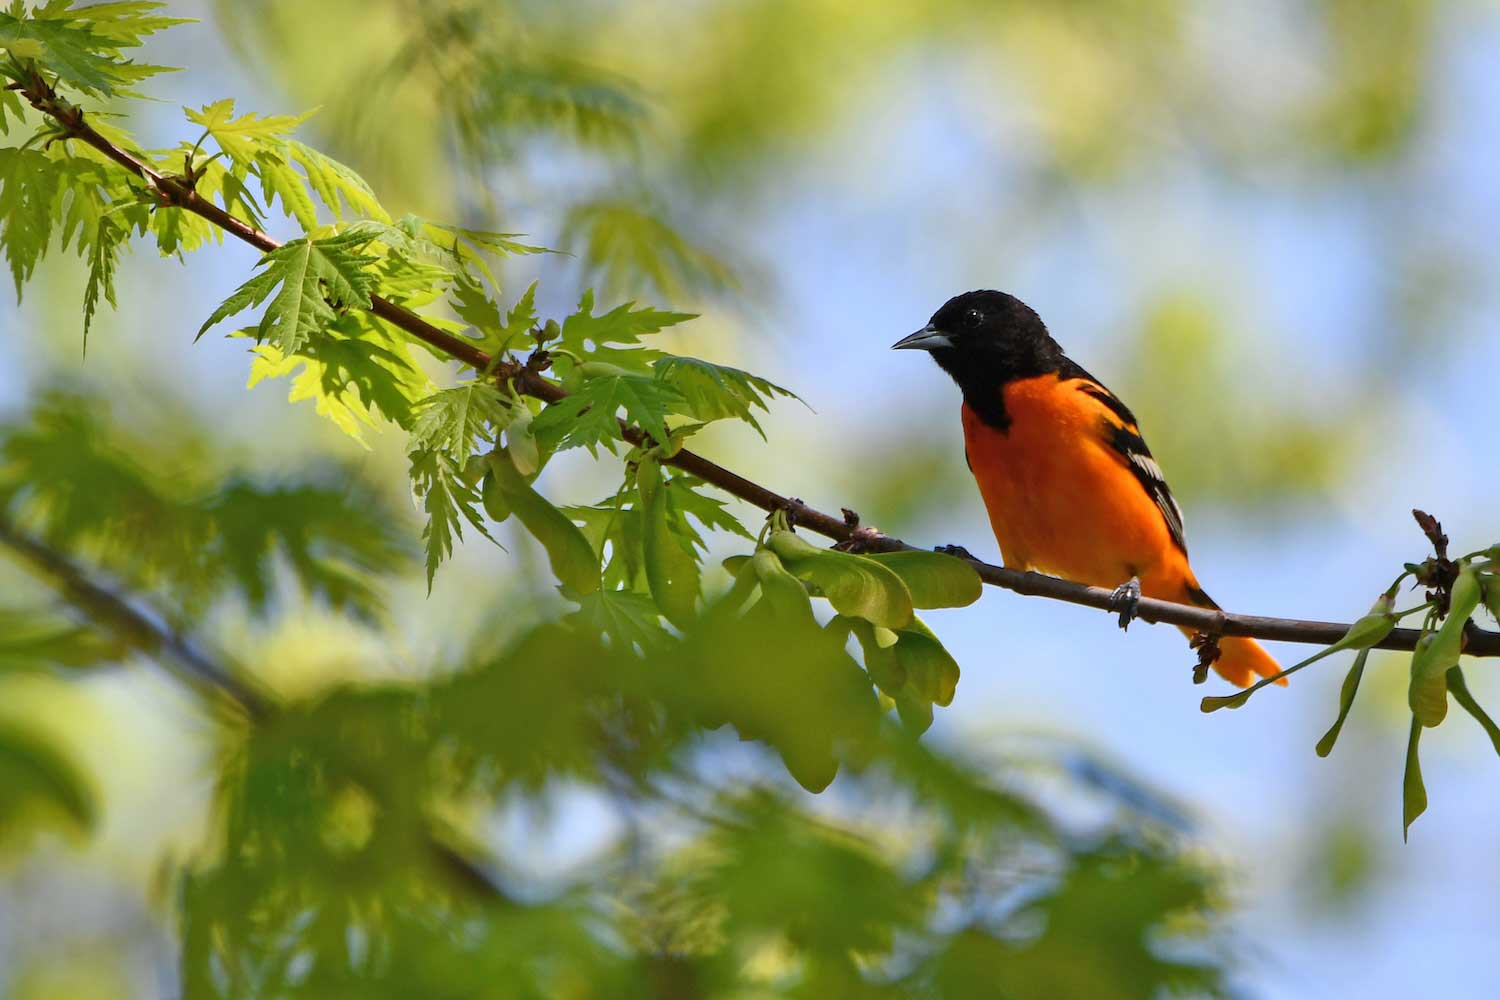 A Baltimore oriole of a tree branch.